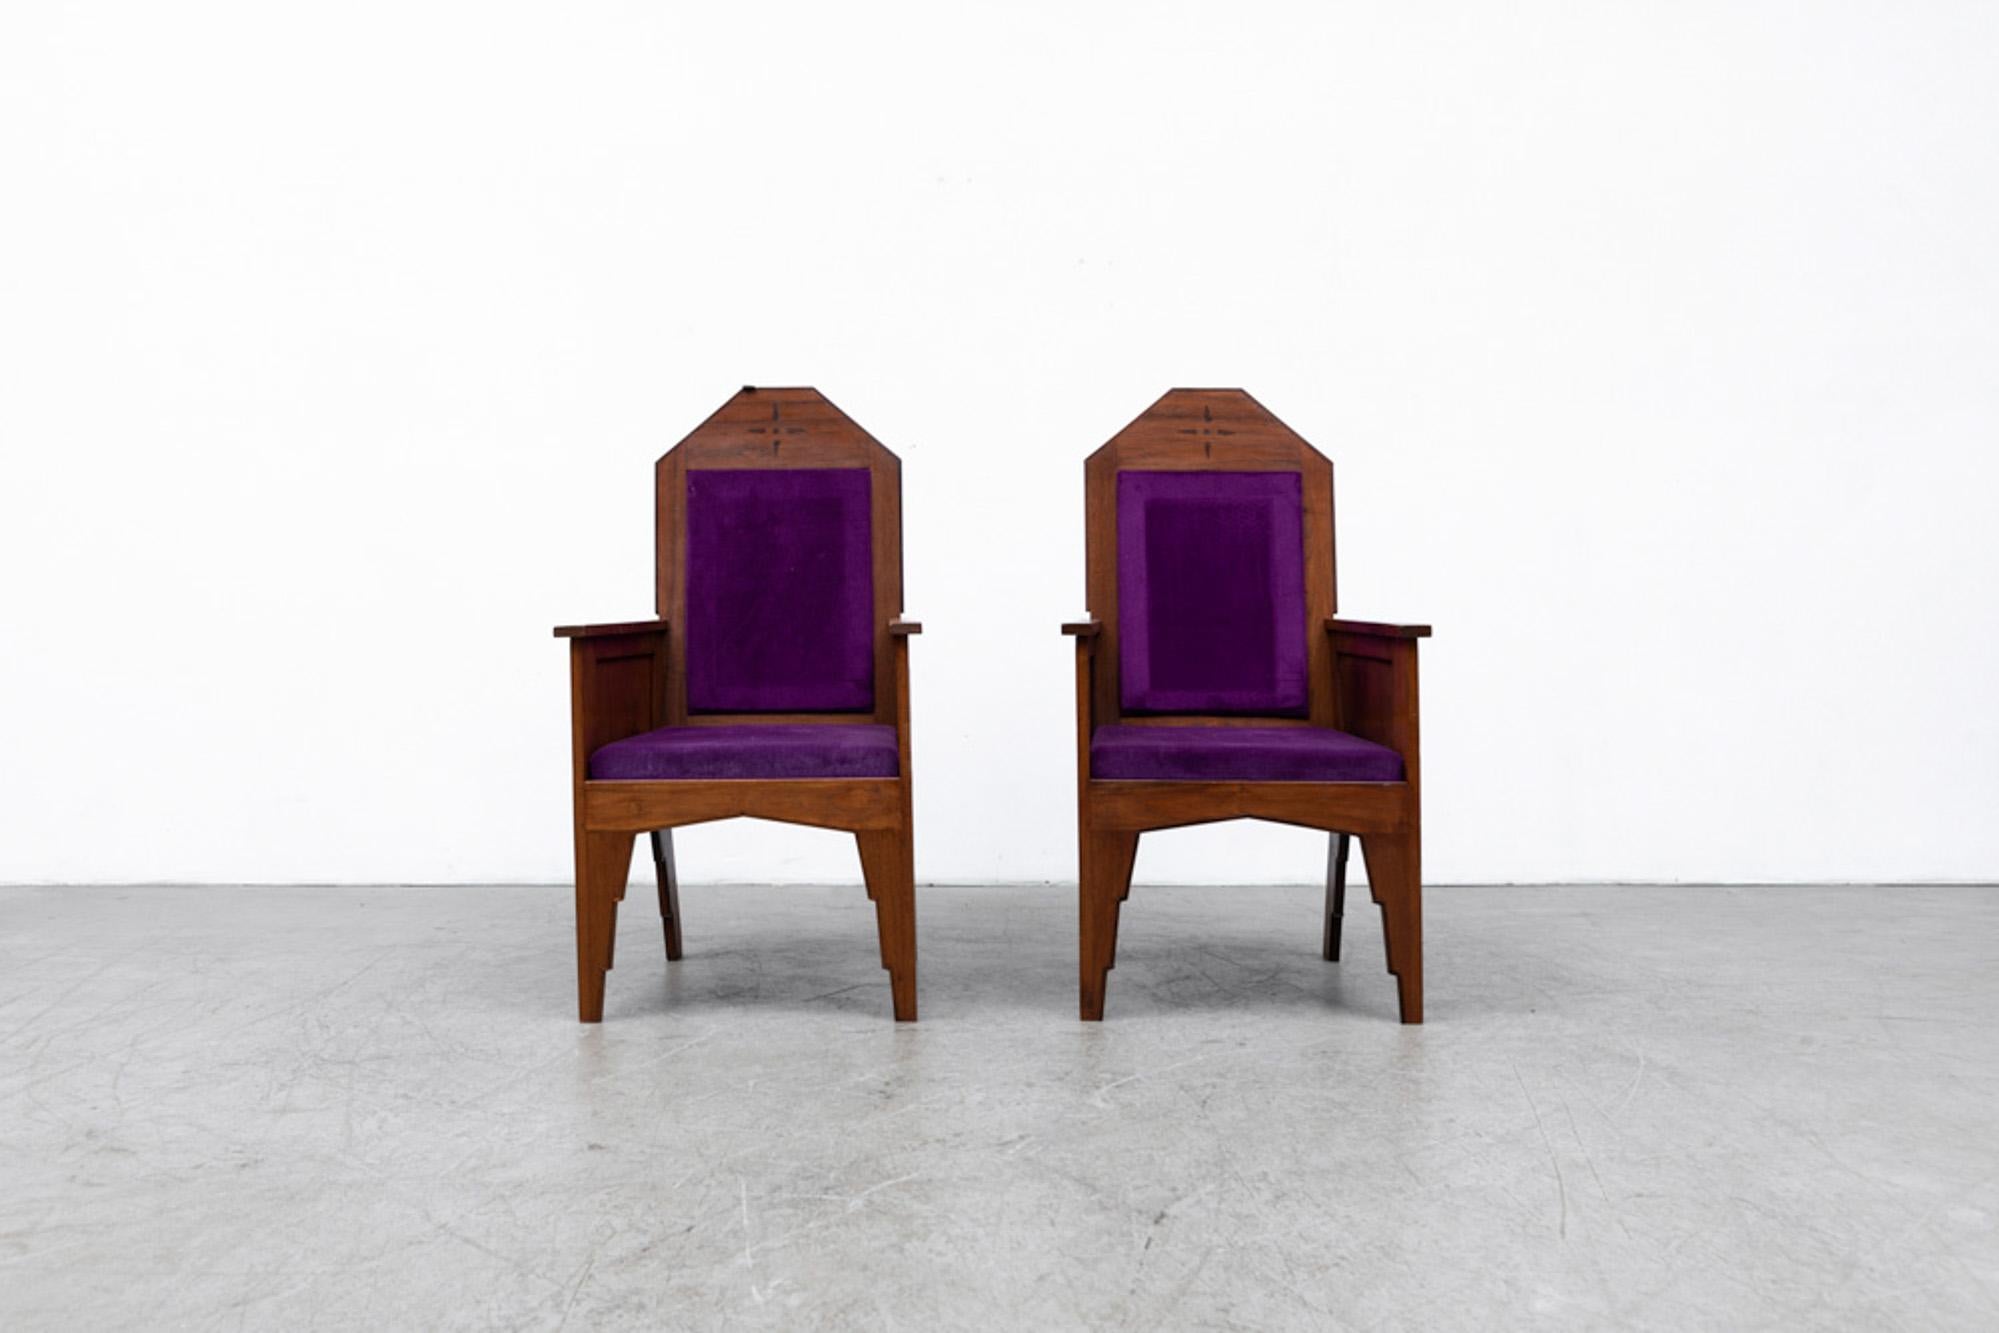 Handsome Pair of Art Deco 'Amsterdam School' arm chairs with purple upholstery. Beautiful Deco detail and design. Frames in original condition with visible wear and patina. Purple Upholstery was added by previous owner, most likely from a church.